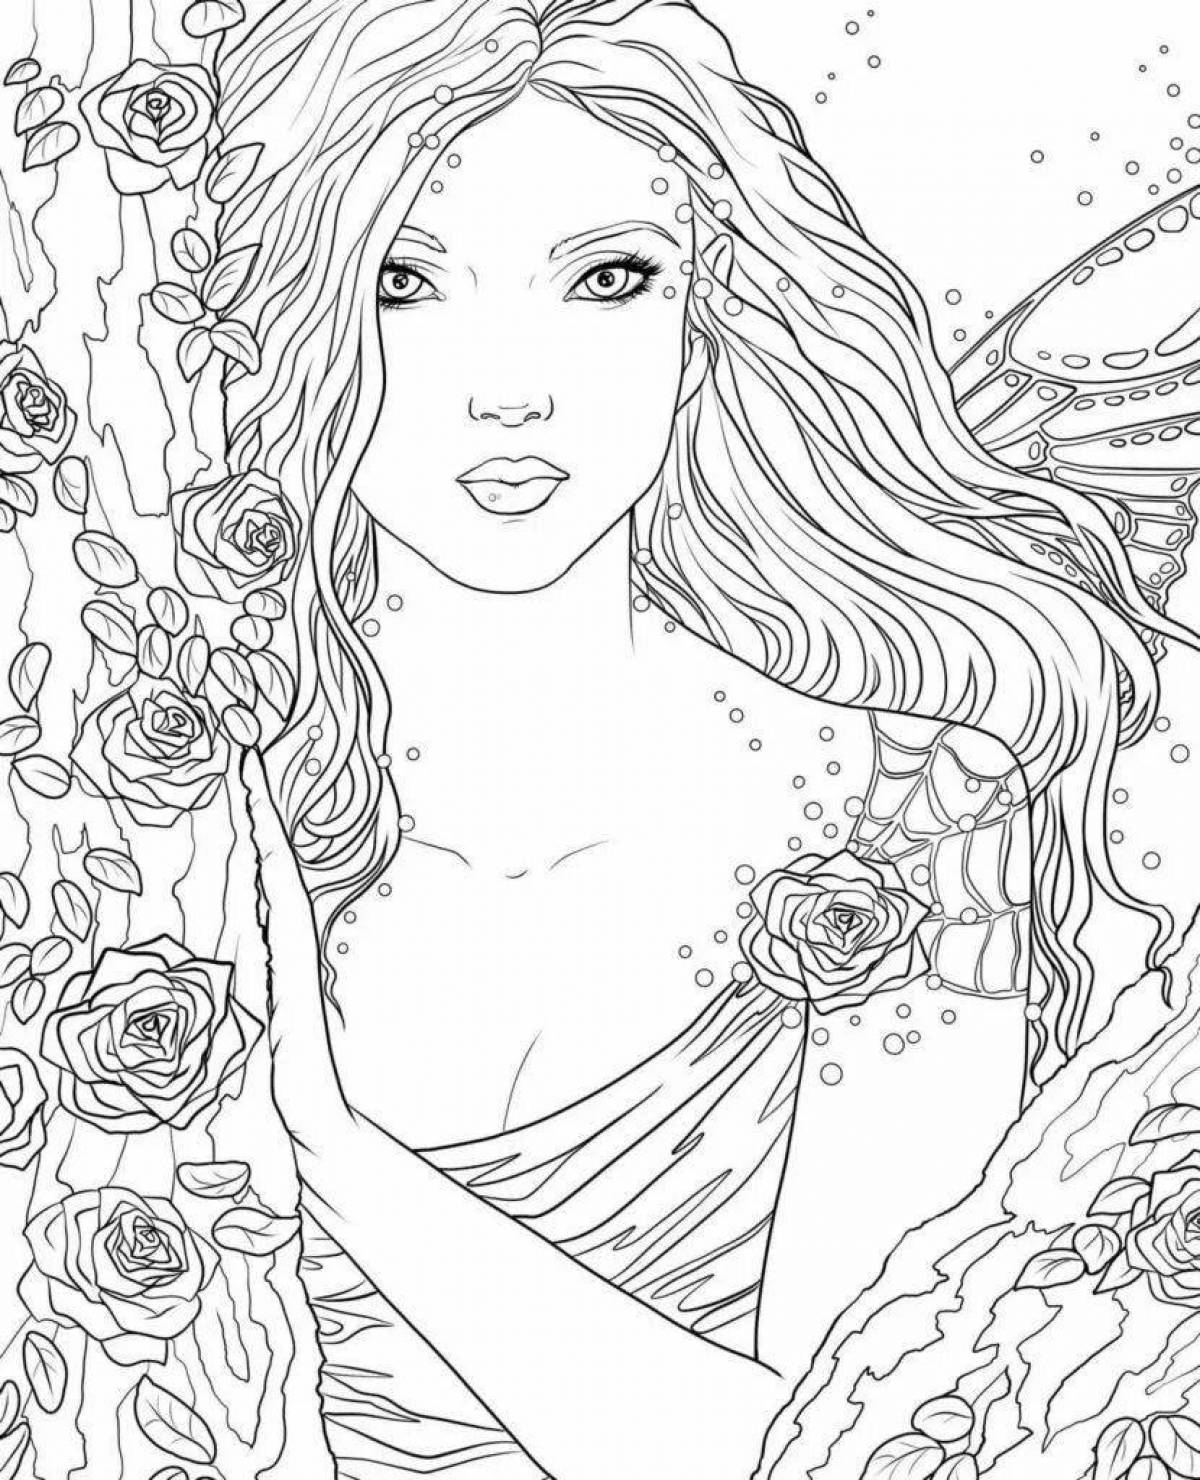 Exotic coloring book for girls 19 years old